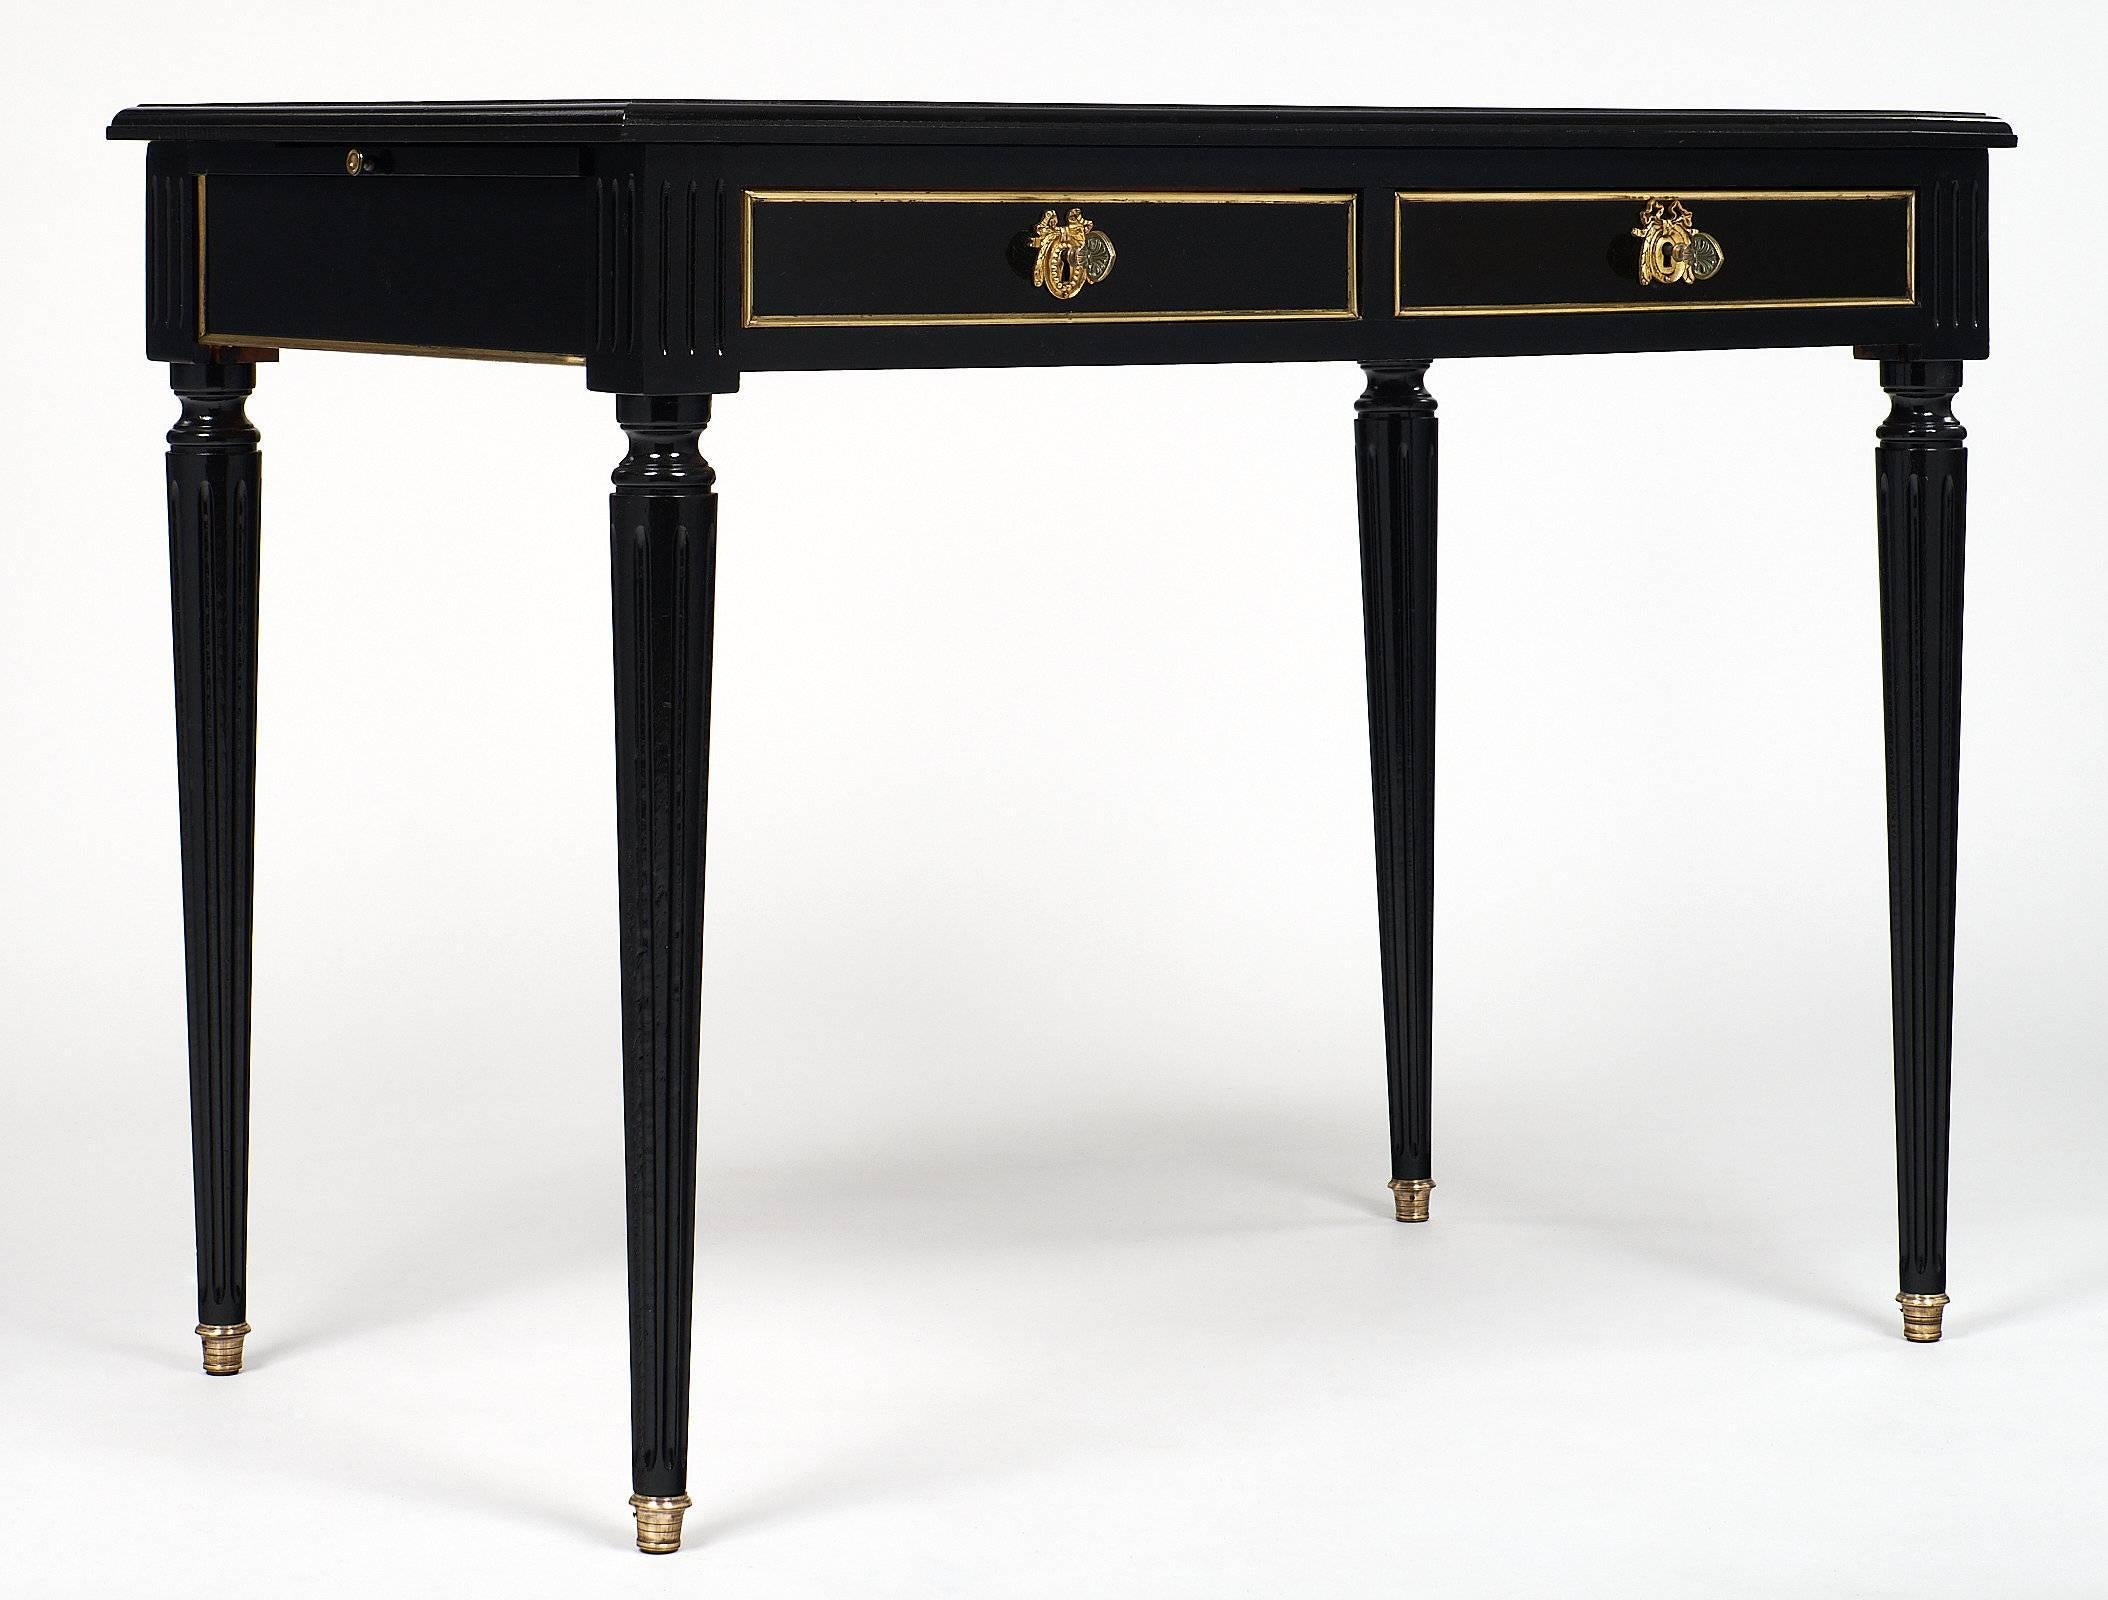 Ebonized Louis XVI style writing desk, with original cognac leather top with 23 carat gold-embossed frieze detail. The front of the piece has two drawers with brass trim, stylized brass escutcheons, and working keys. The other three sides also have